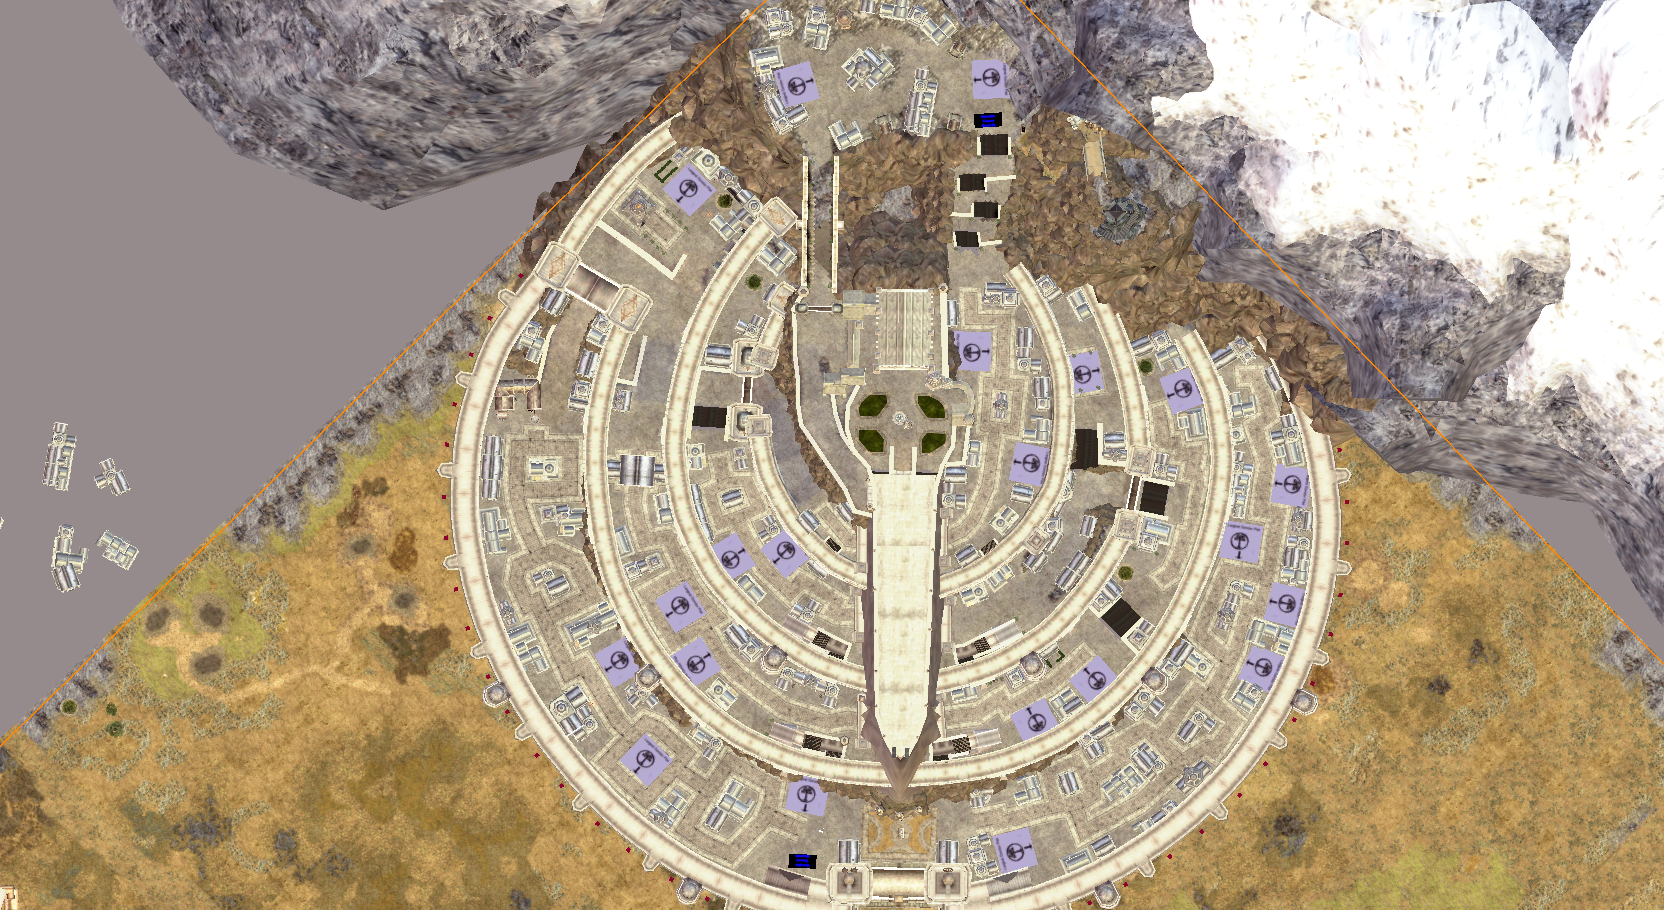 Download War of Minas Tirith WC3 Map [Other]